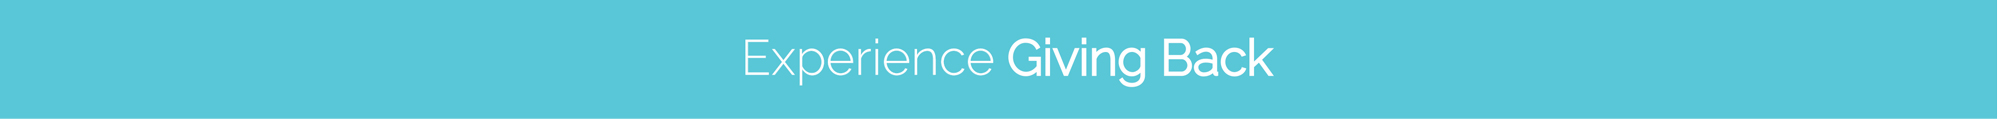 experience-of-giving-back-header2-1